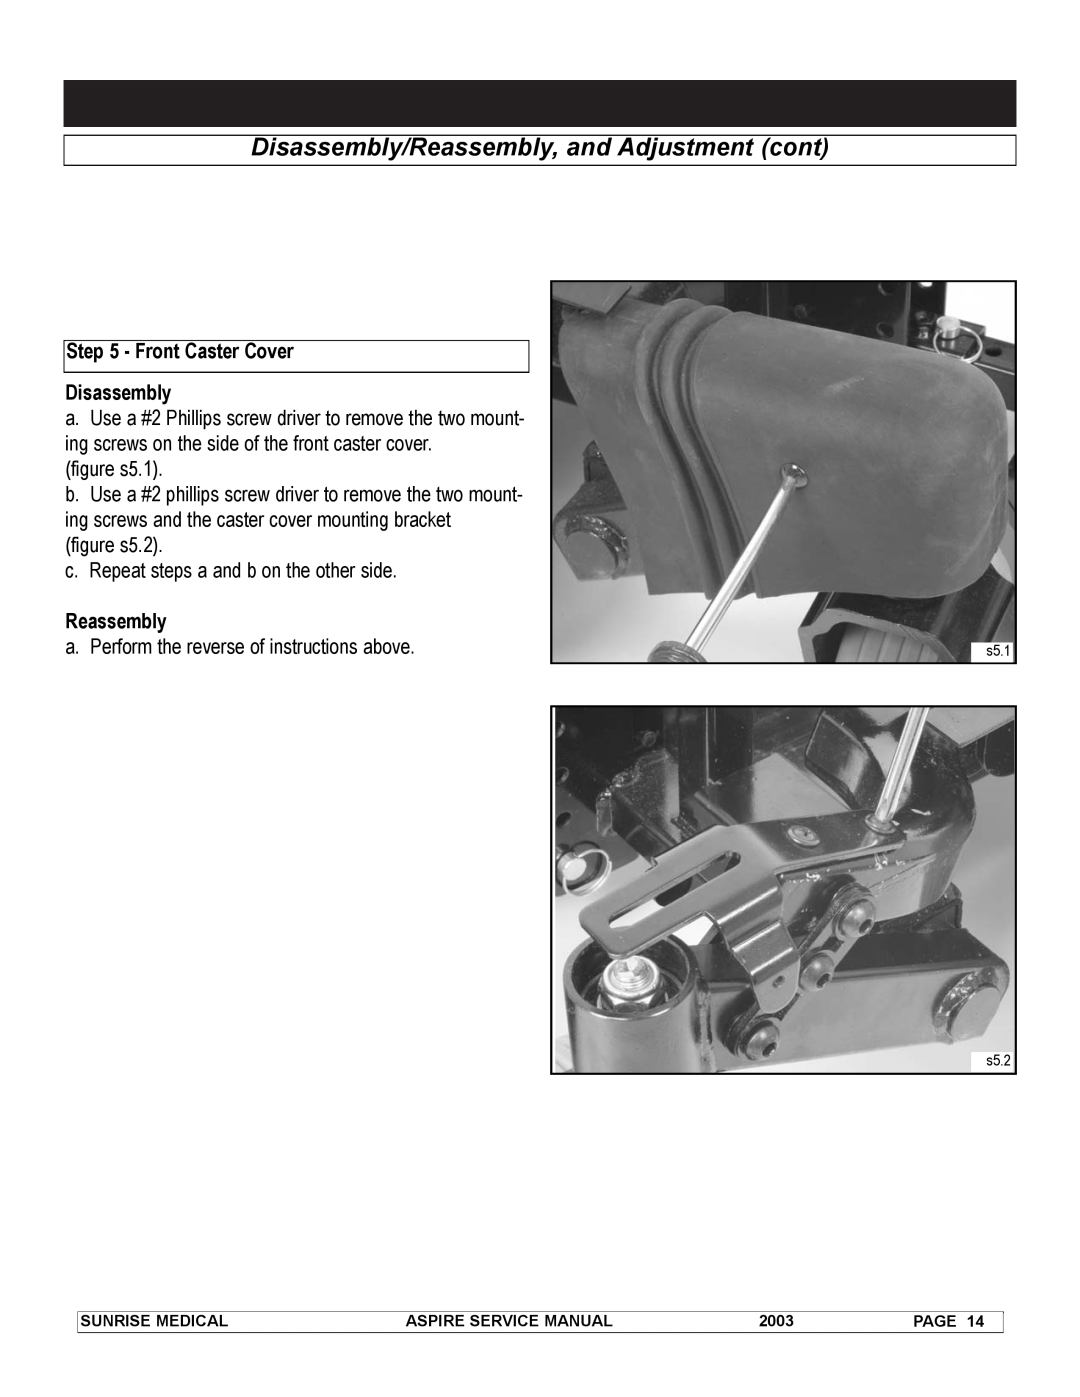 Sunrise Medical 931157 service manual Disassembly/Reassembly, and Adjustment cont, s5.1, s5.2 